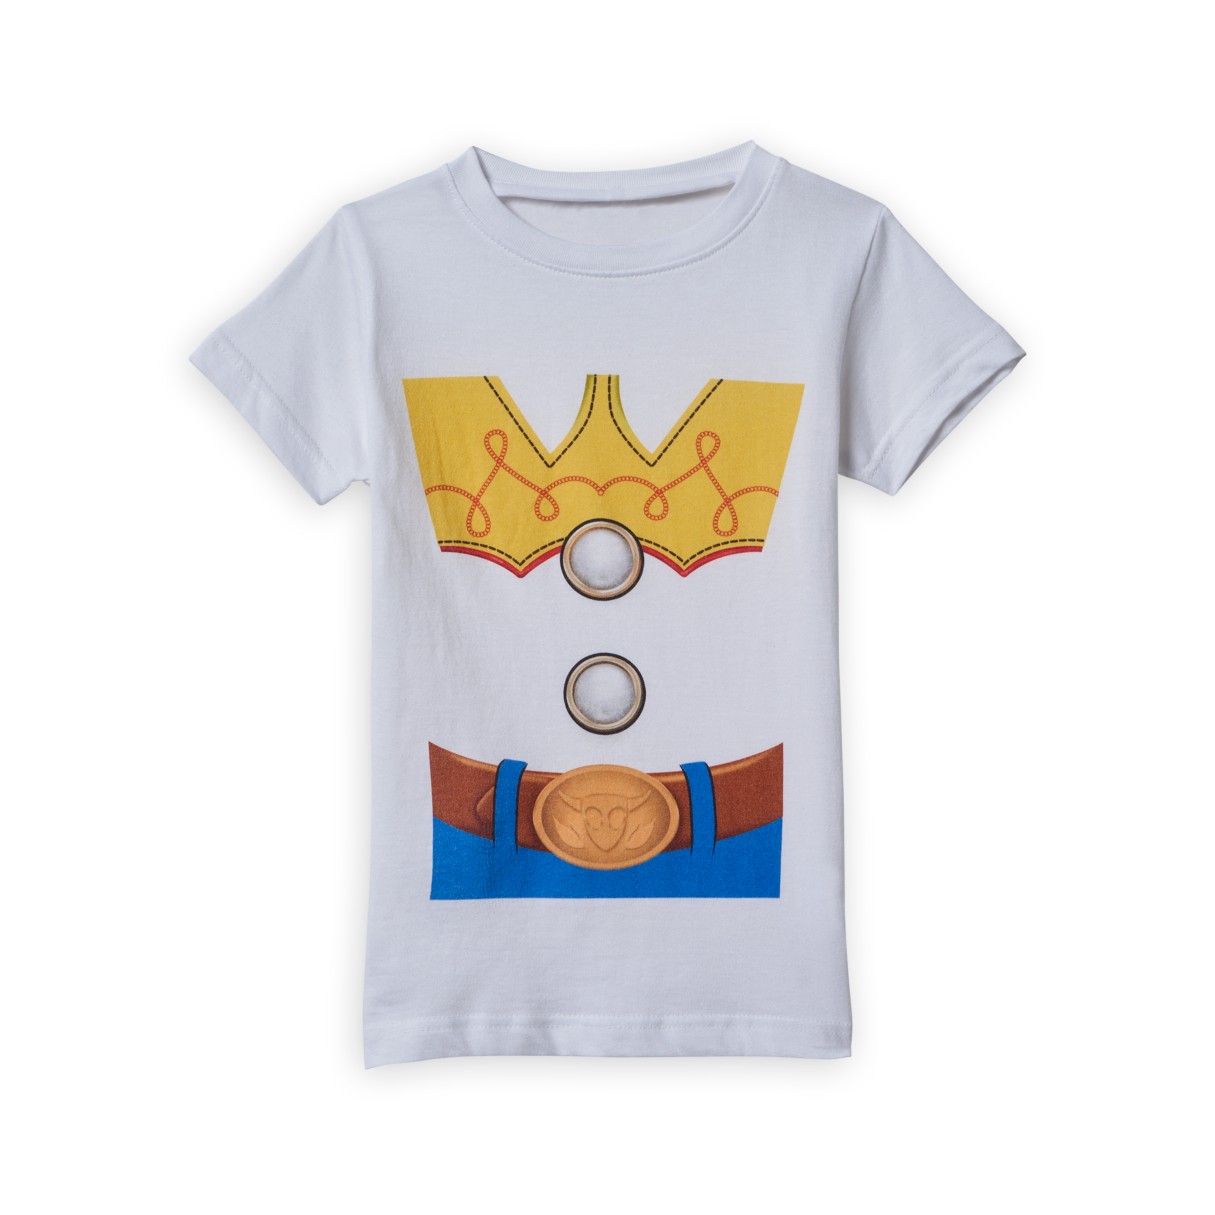 Jessie Costume T-Shirt for Kids – Toy Story